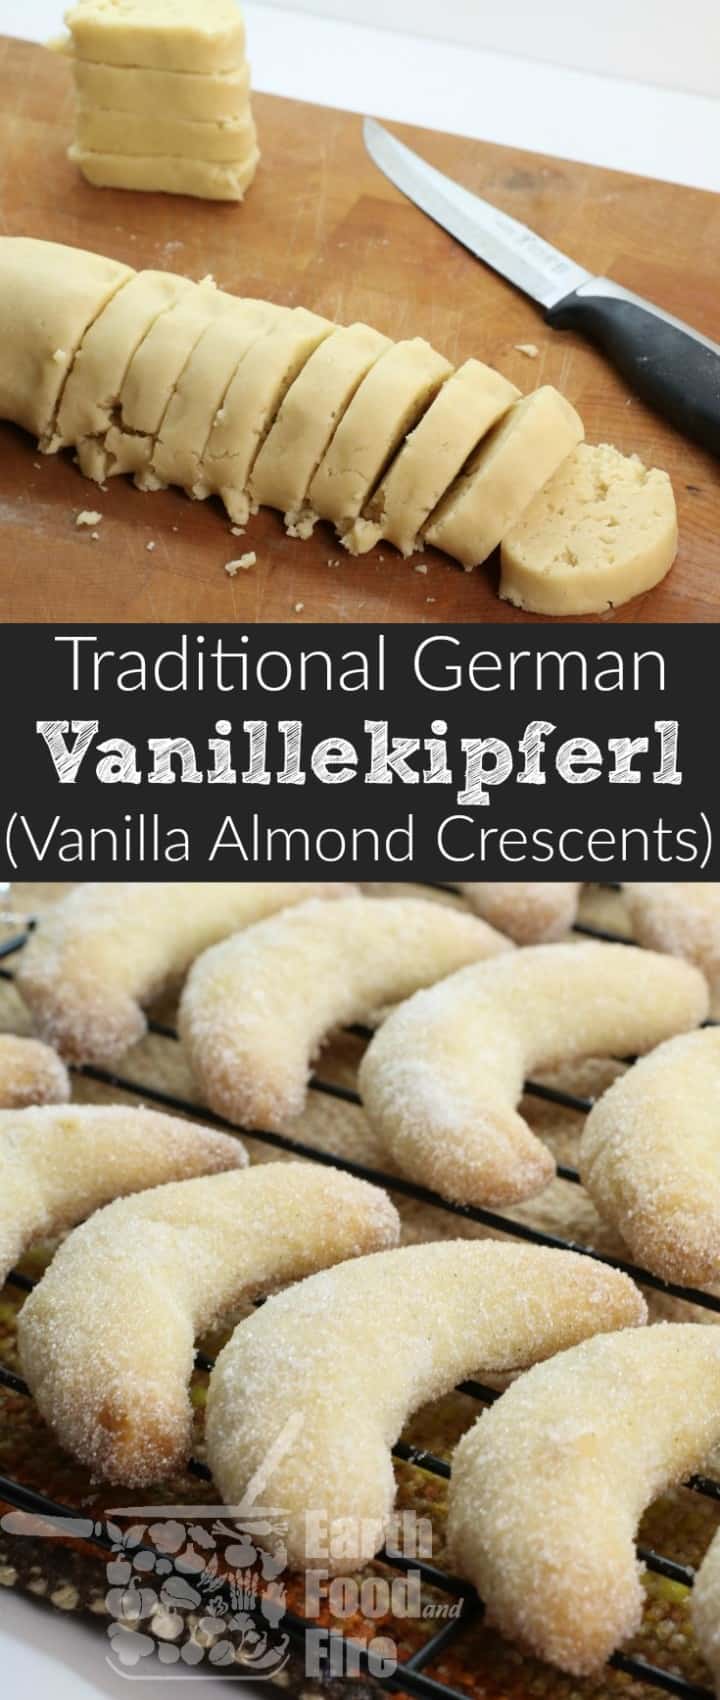 A light shortbread like almond and vanilla cookie, perfect during the holidays. So easy to make and can be shaped however you like! #vanillekipferl #christmascookies #cookies #germanbaking